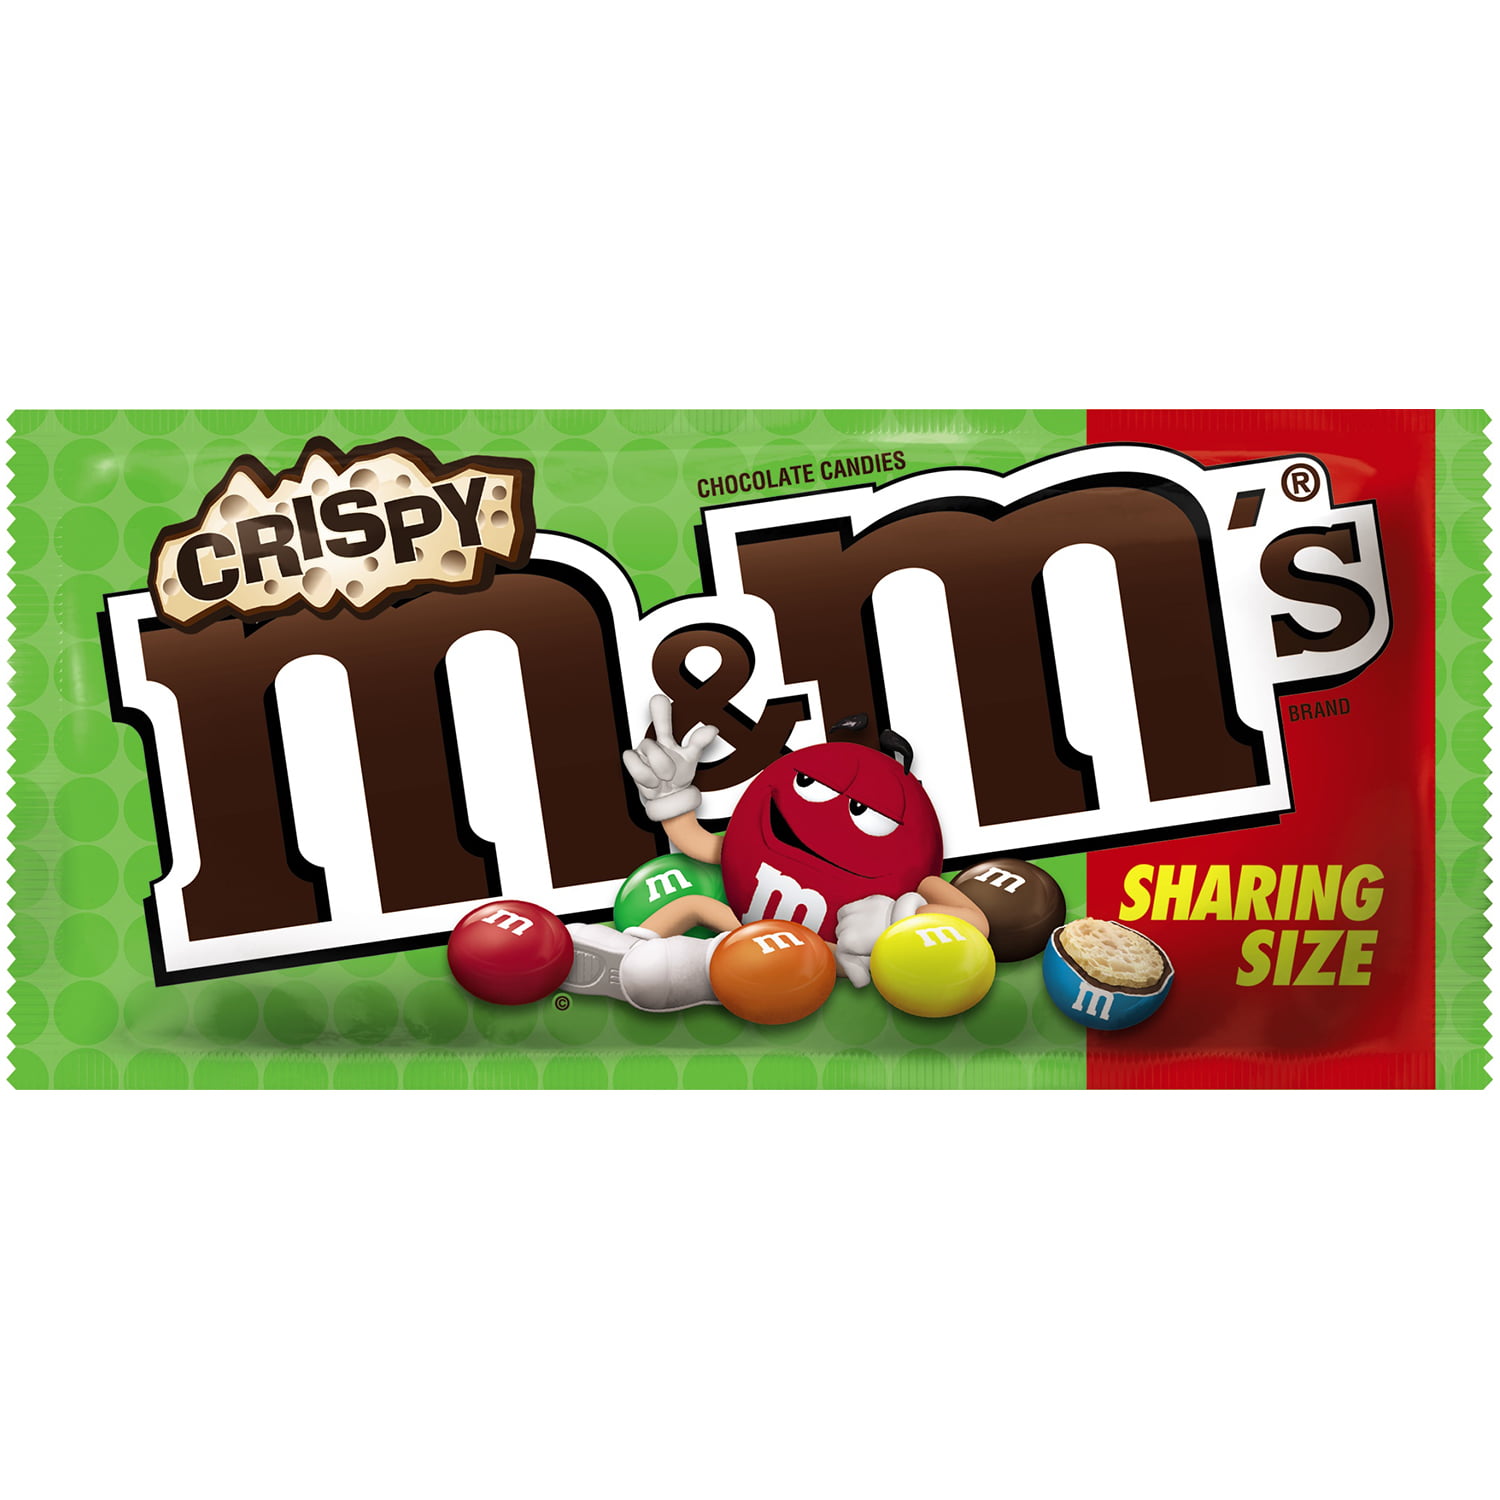 M&M's Crunchy Cookie Share Size 2.83 oz 24ct Box